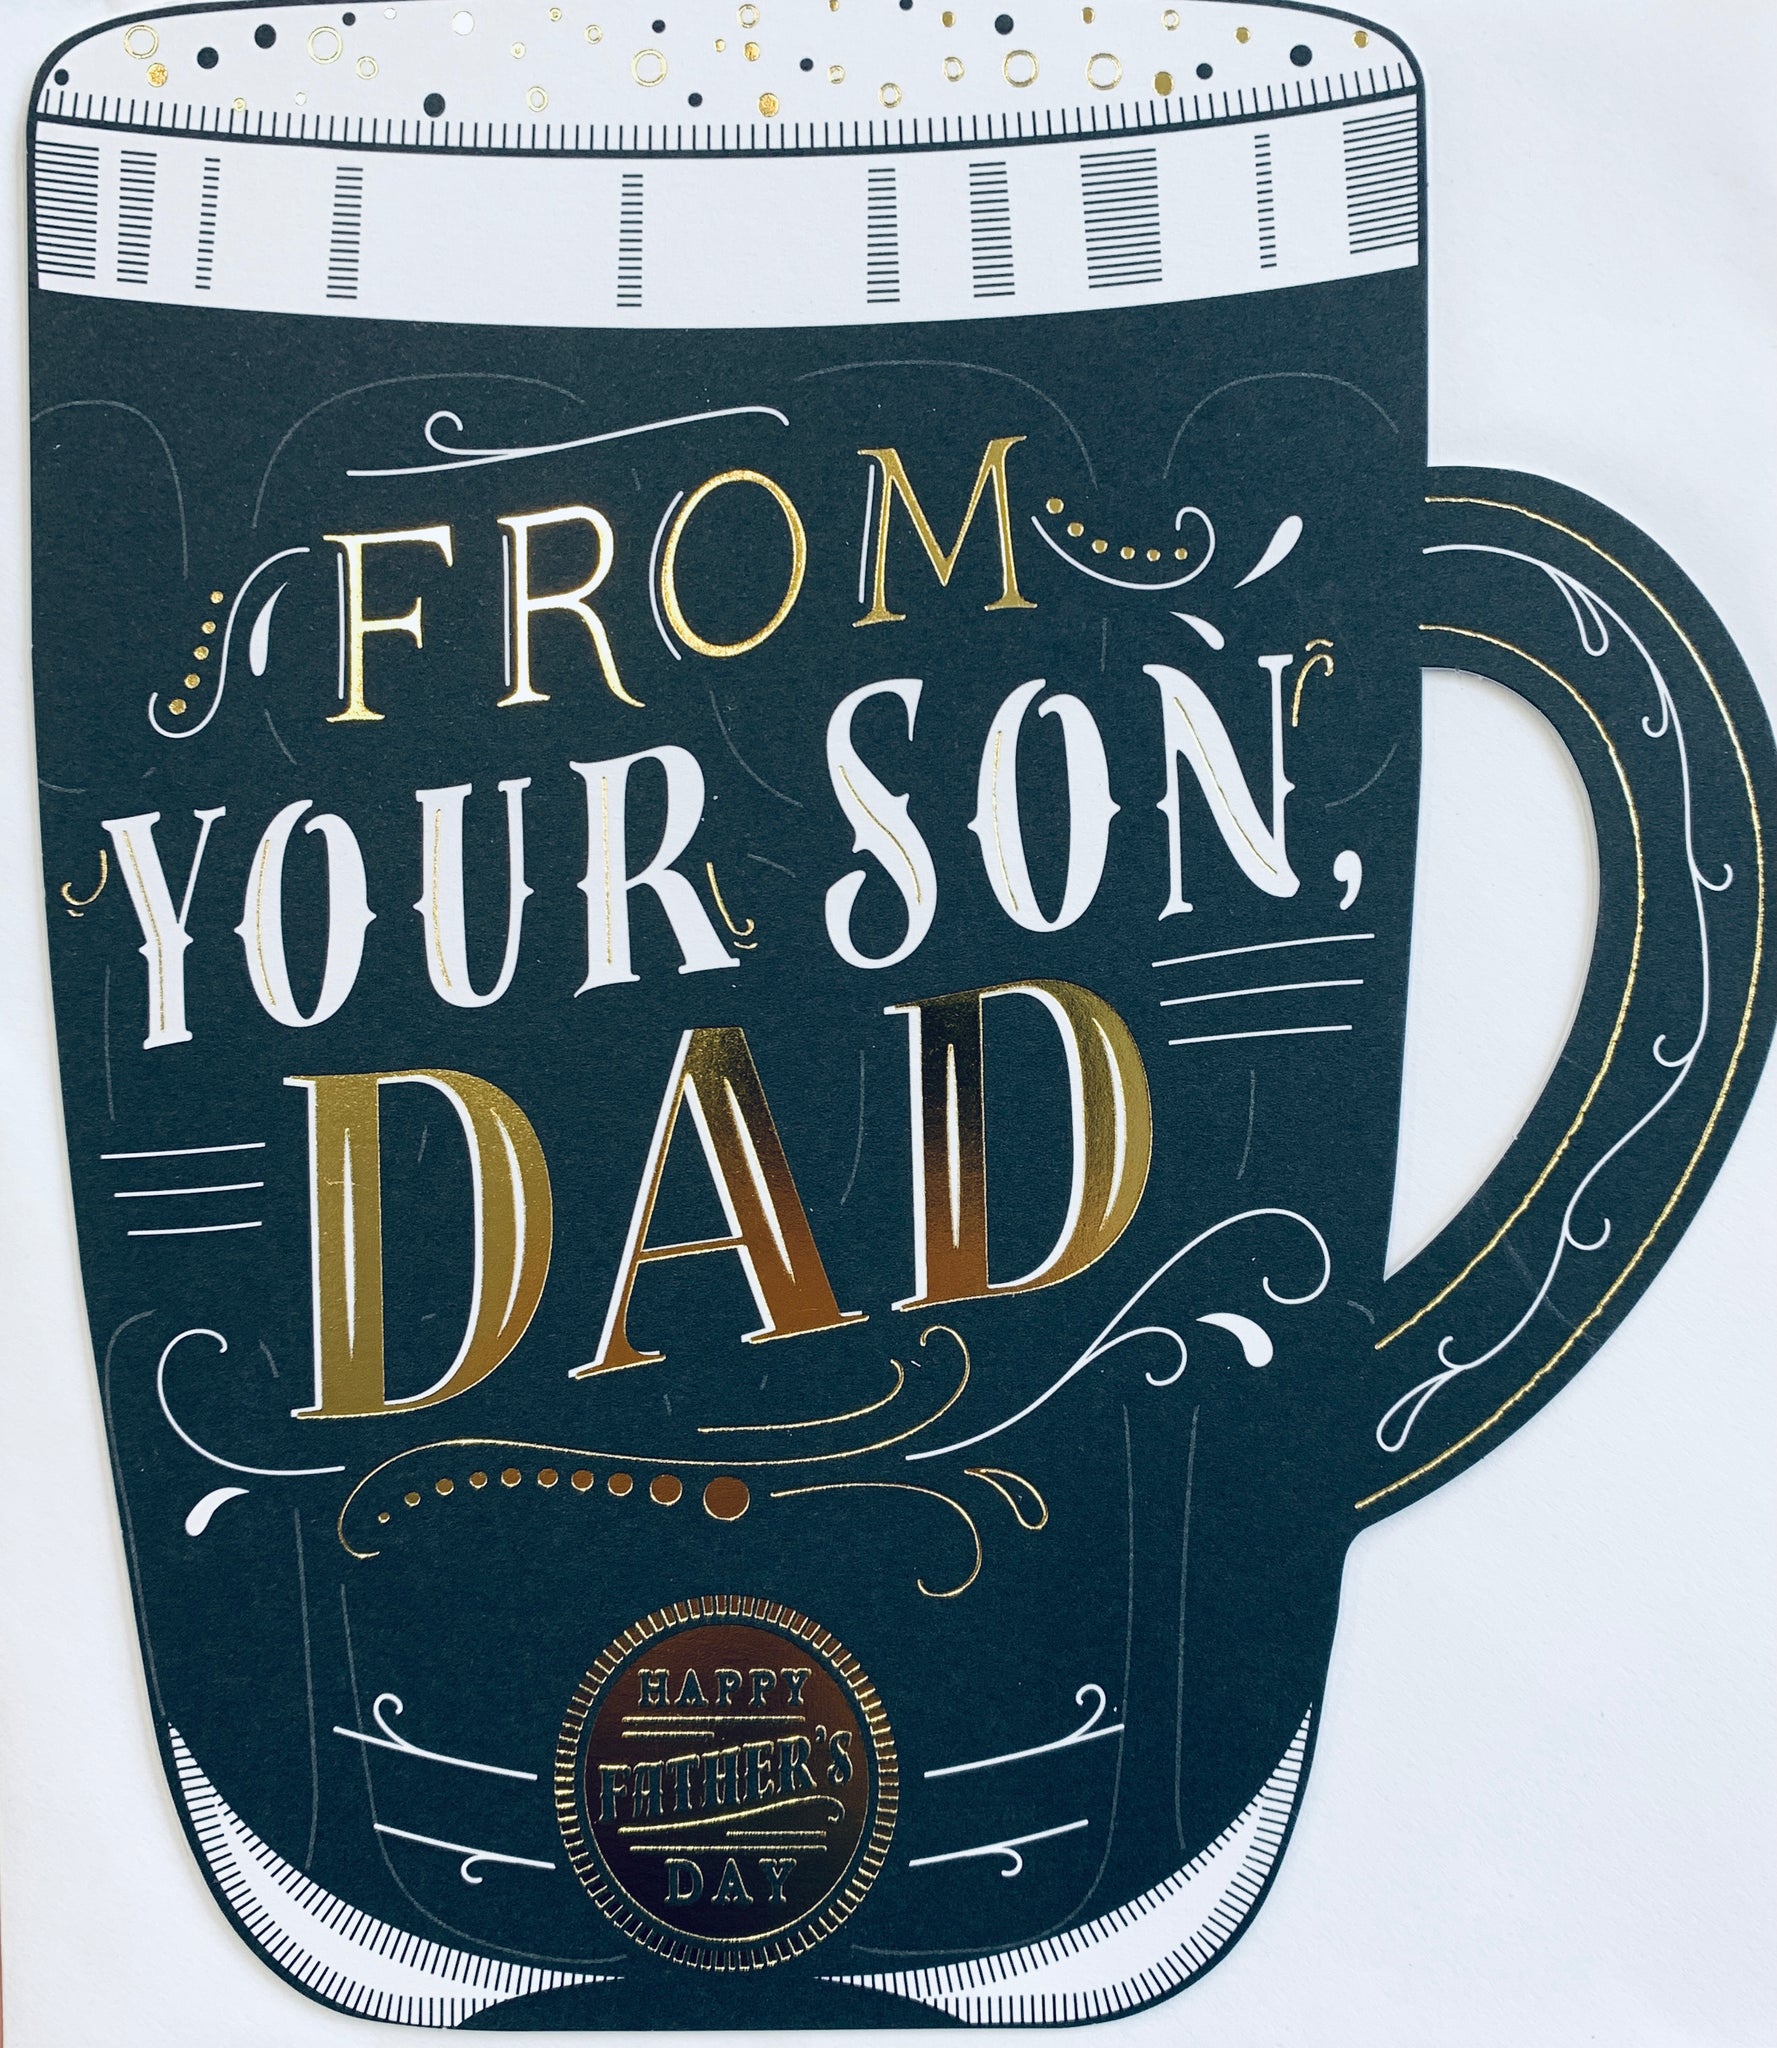 Dad Father’s Day card from your Son - craft beer